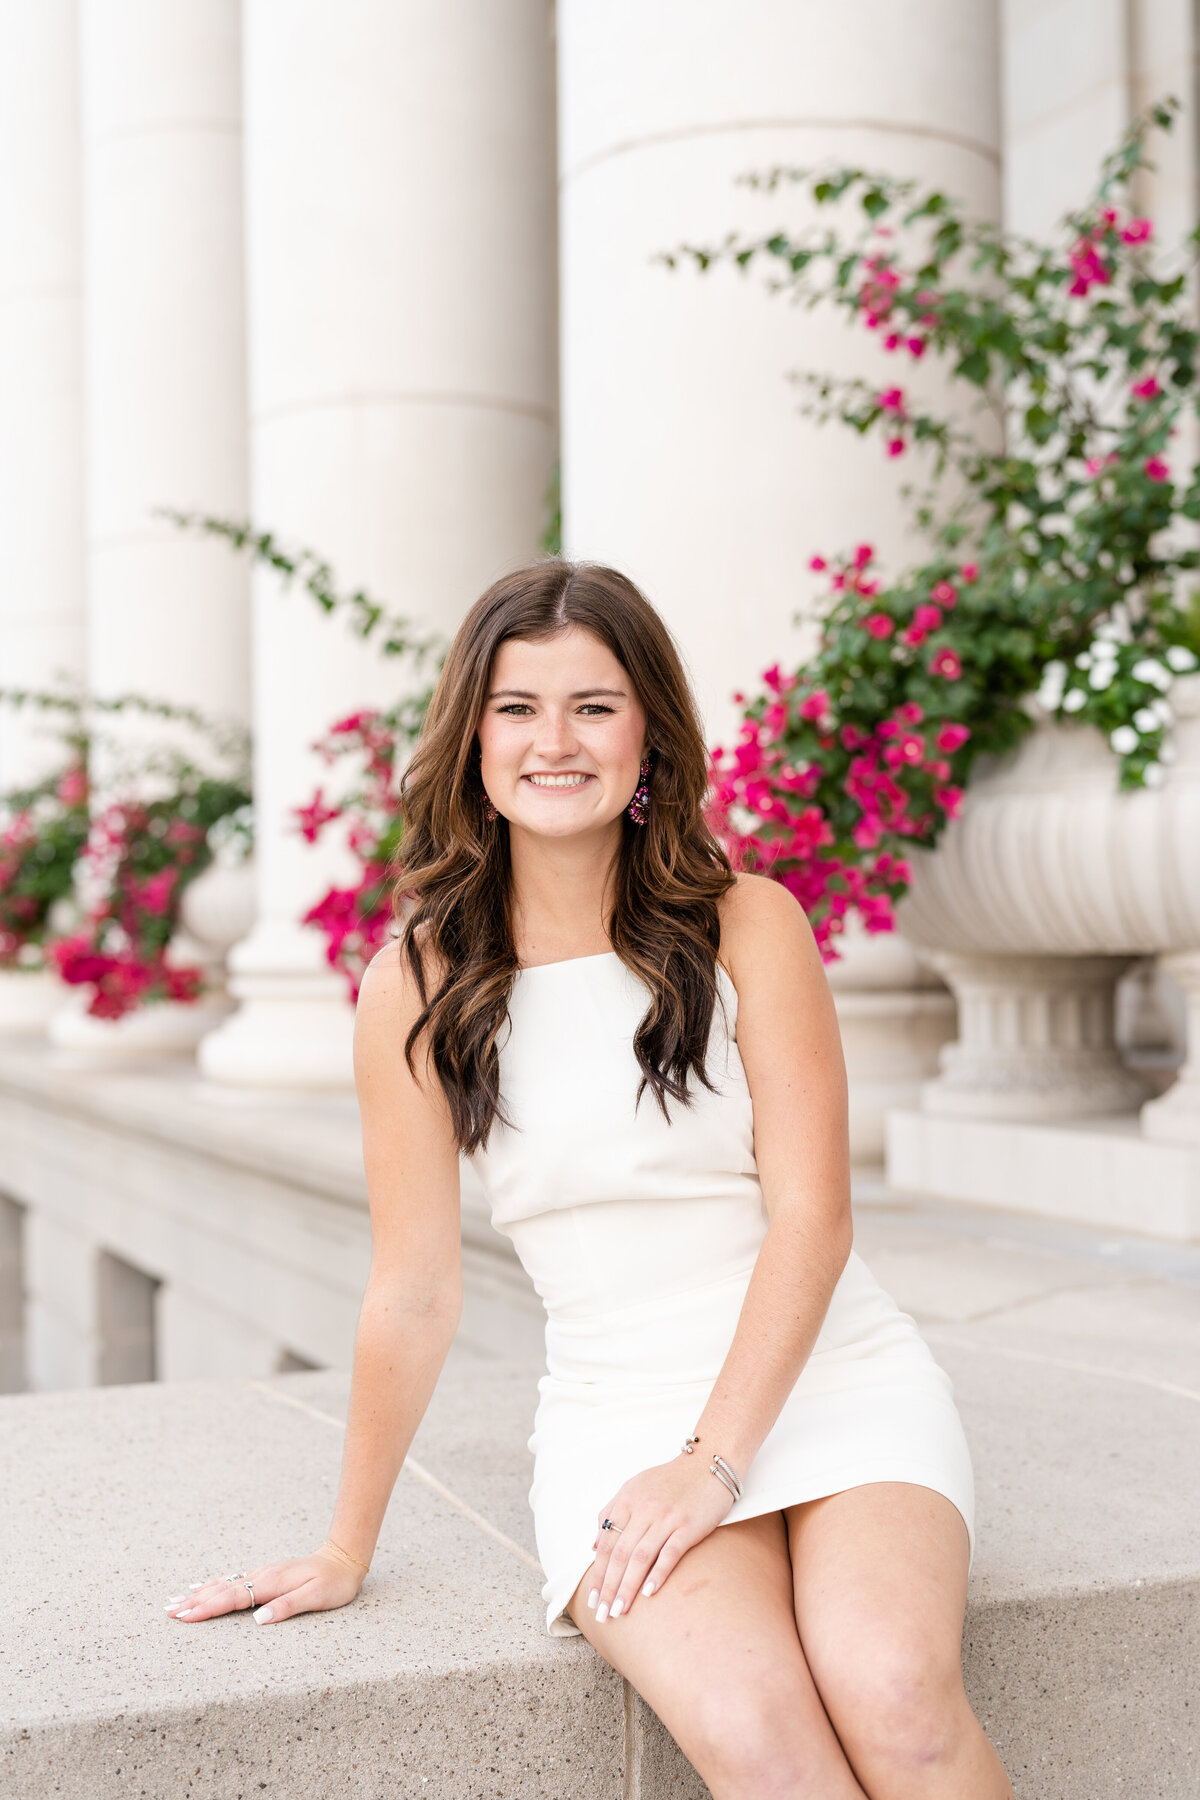 Texas A&M senior girl sitting in front of Administration Building while wearing white dress and smiling with pink flowers behind her